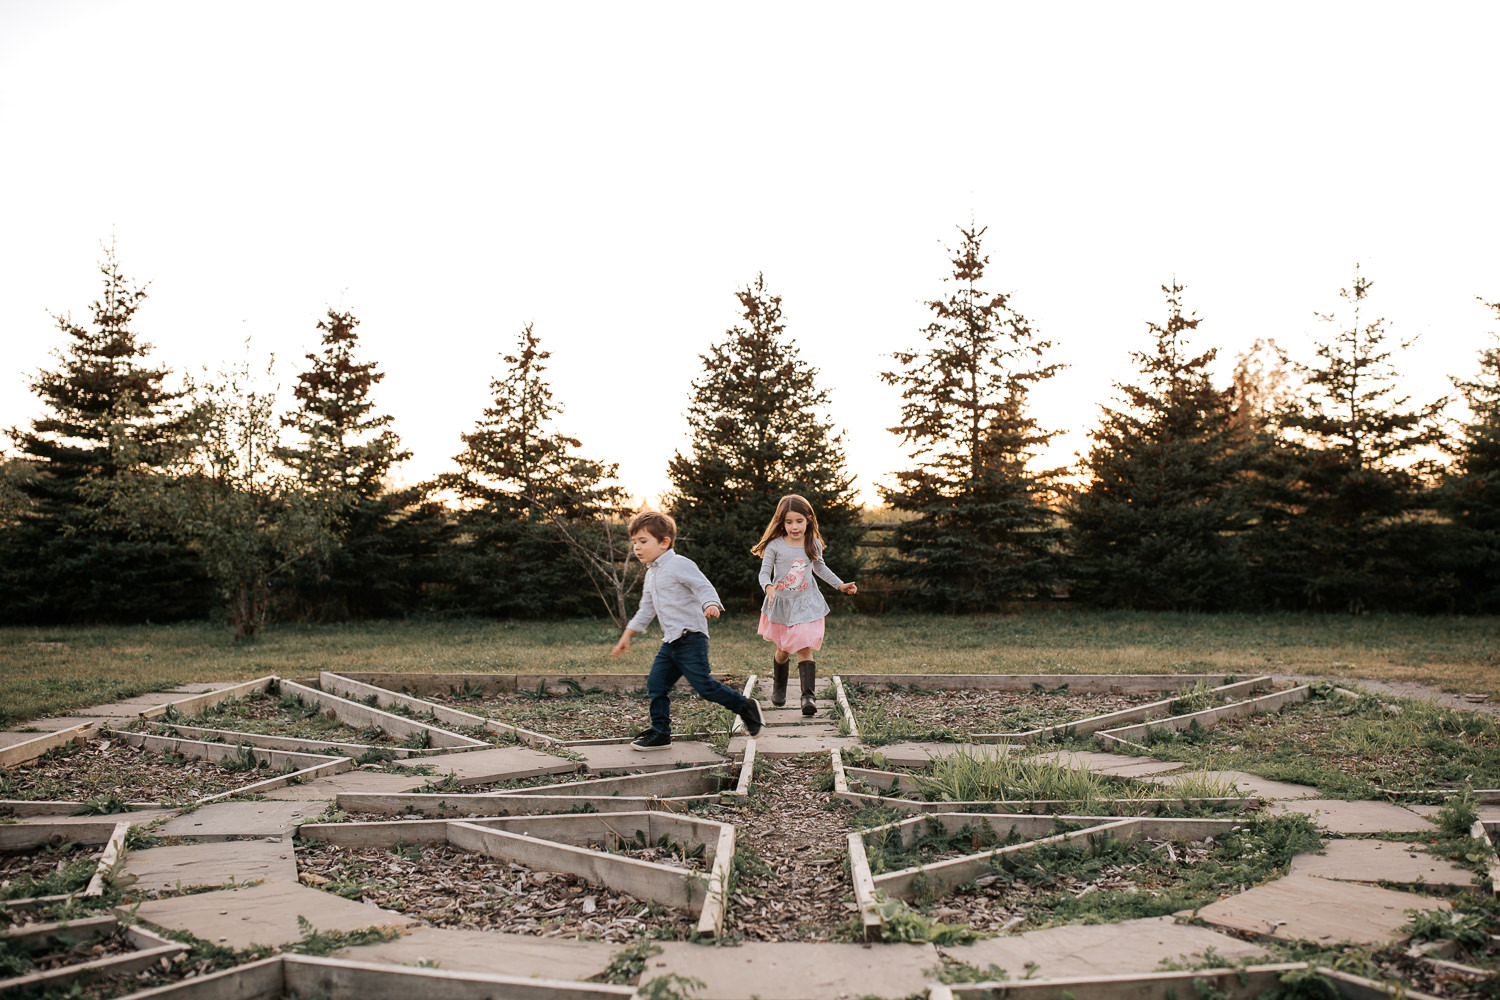 4 year old boy and 5 year old girl both with dark hair running through maze on ground as sun sets behind them - York Region Lifestyle Photos